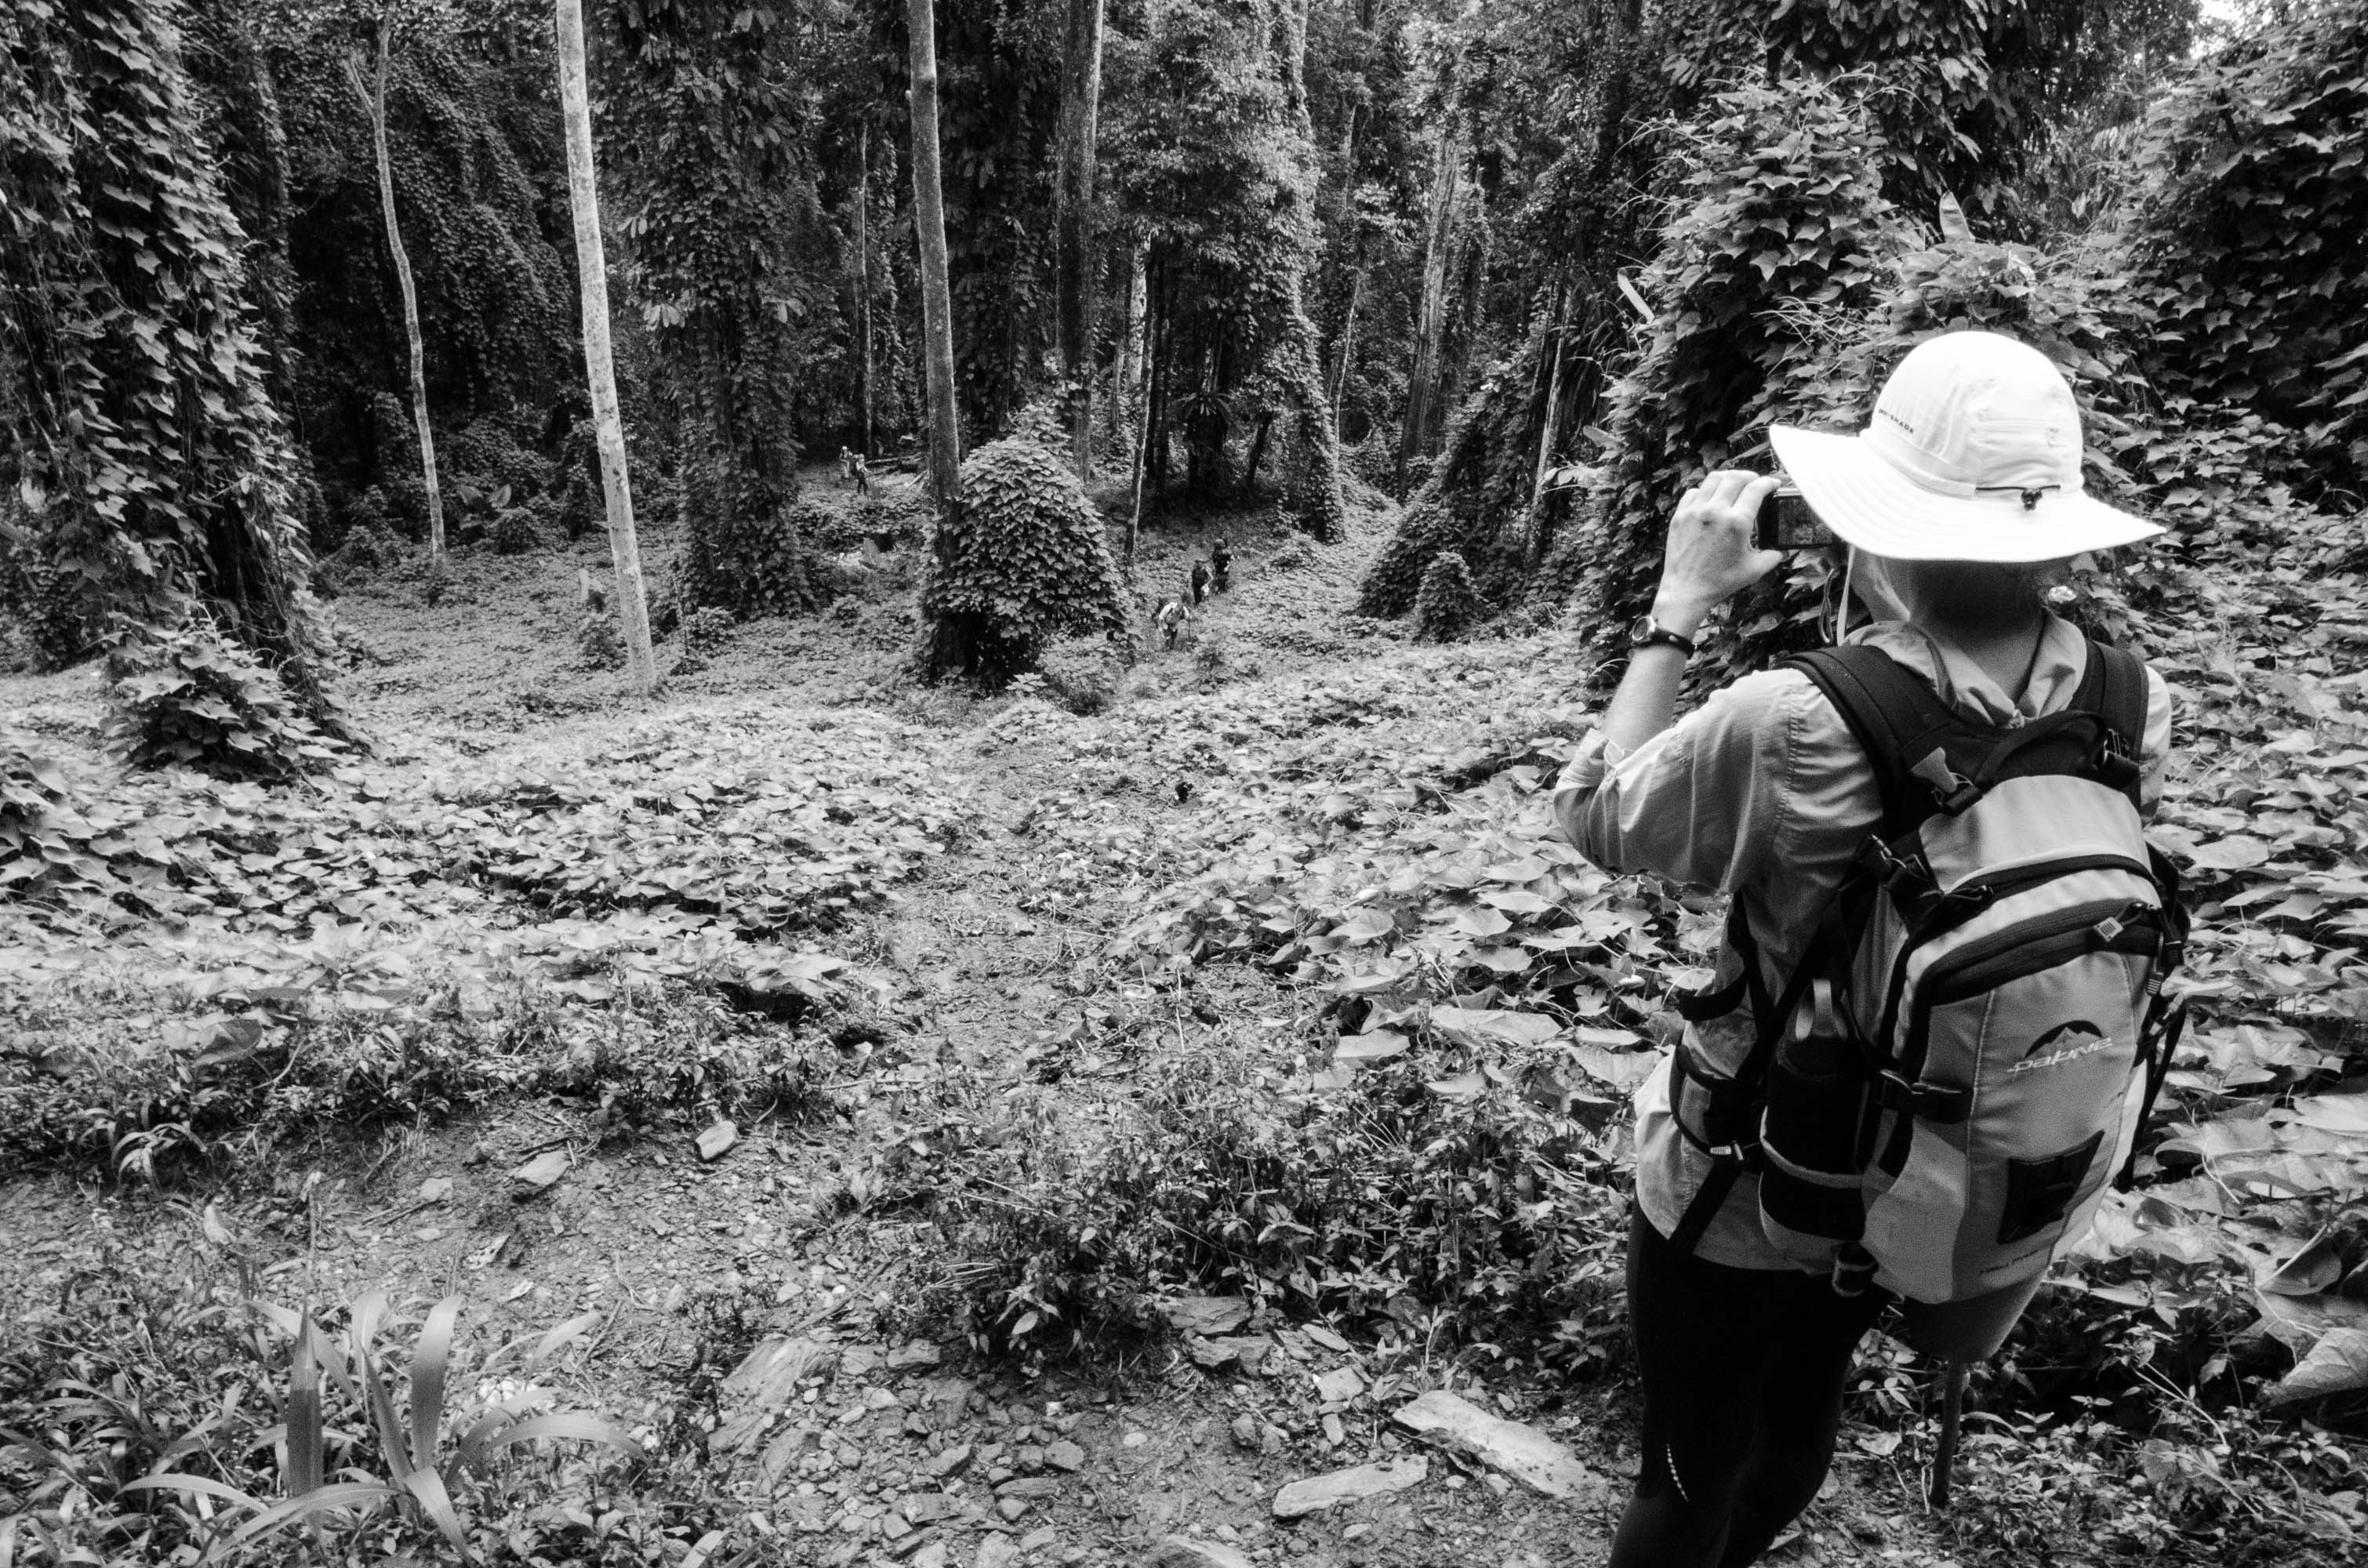  The thick Highland jungle would have seemed impassable to both the Japanese and Australian soldiers, though villagers had been utilising the Kokoda Track as a highway for many years.